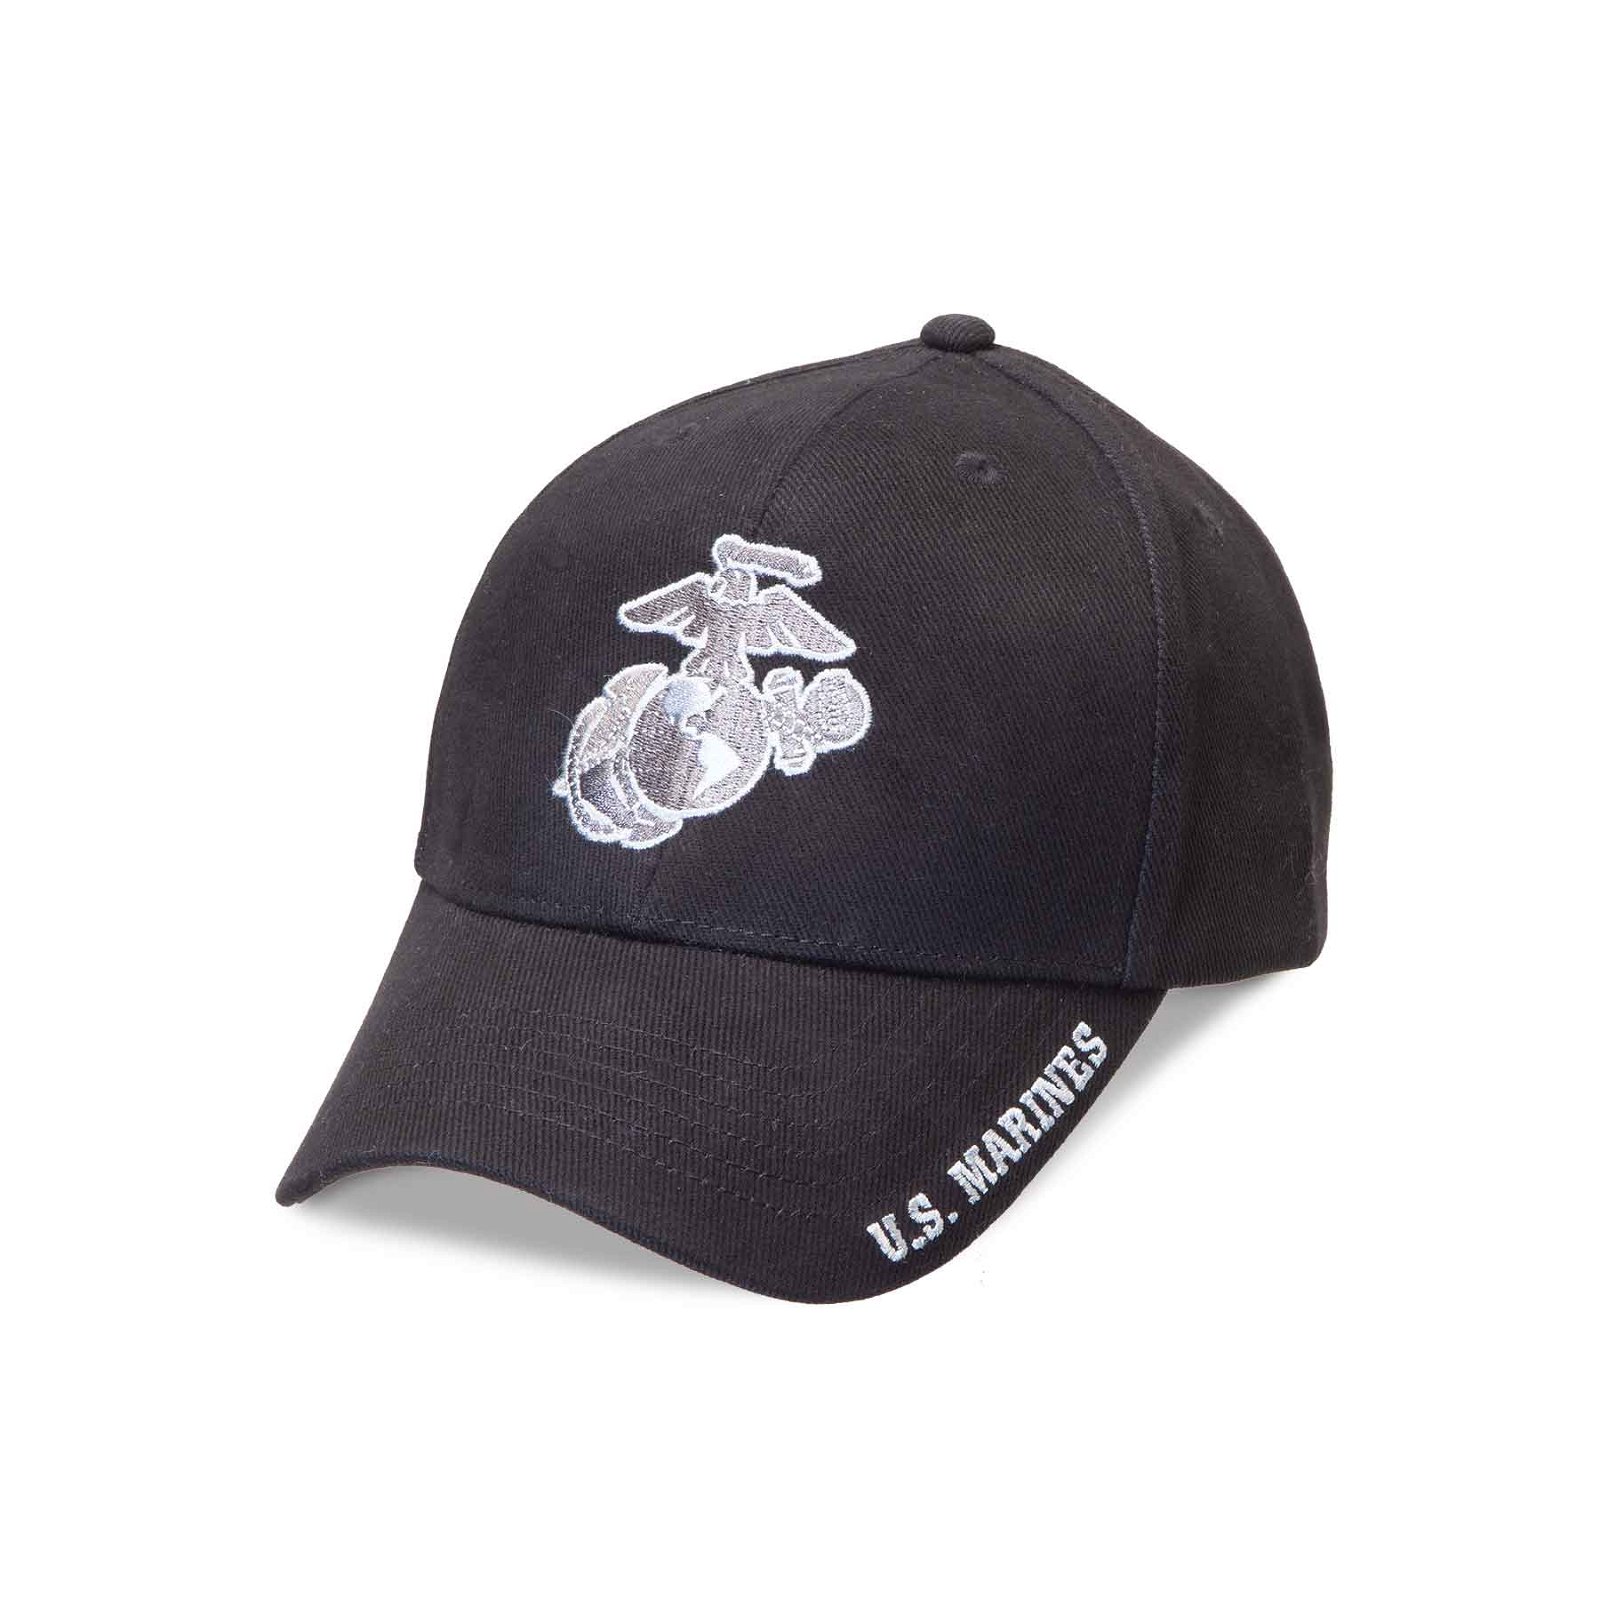 Image of Eagle, Globe, and Anchor Hat- Black and Silver